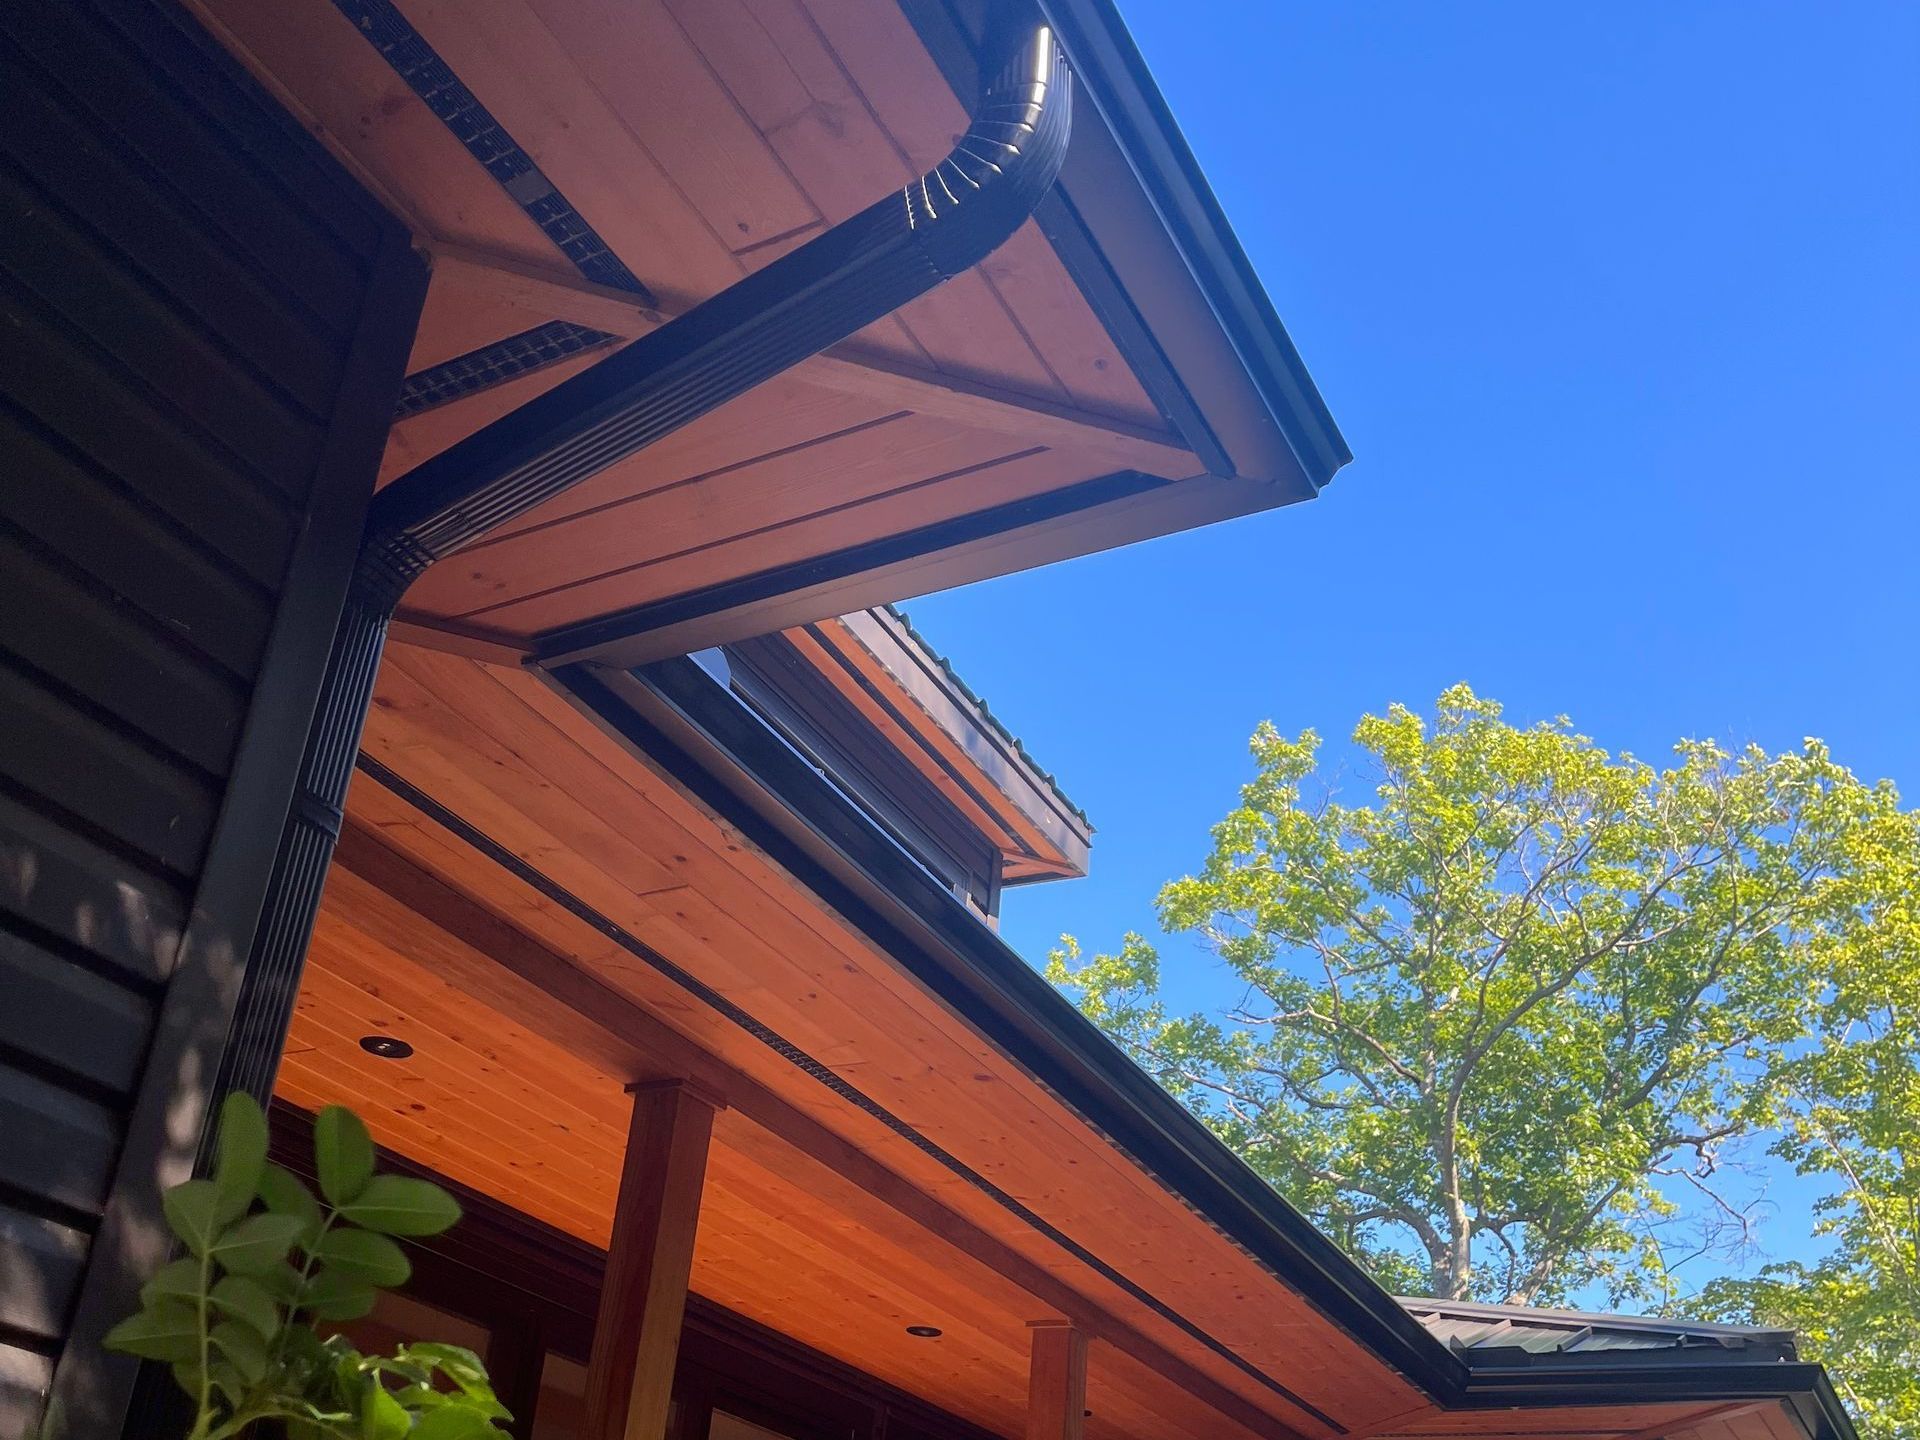 Looking up at the roof of a house with a tree in the background